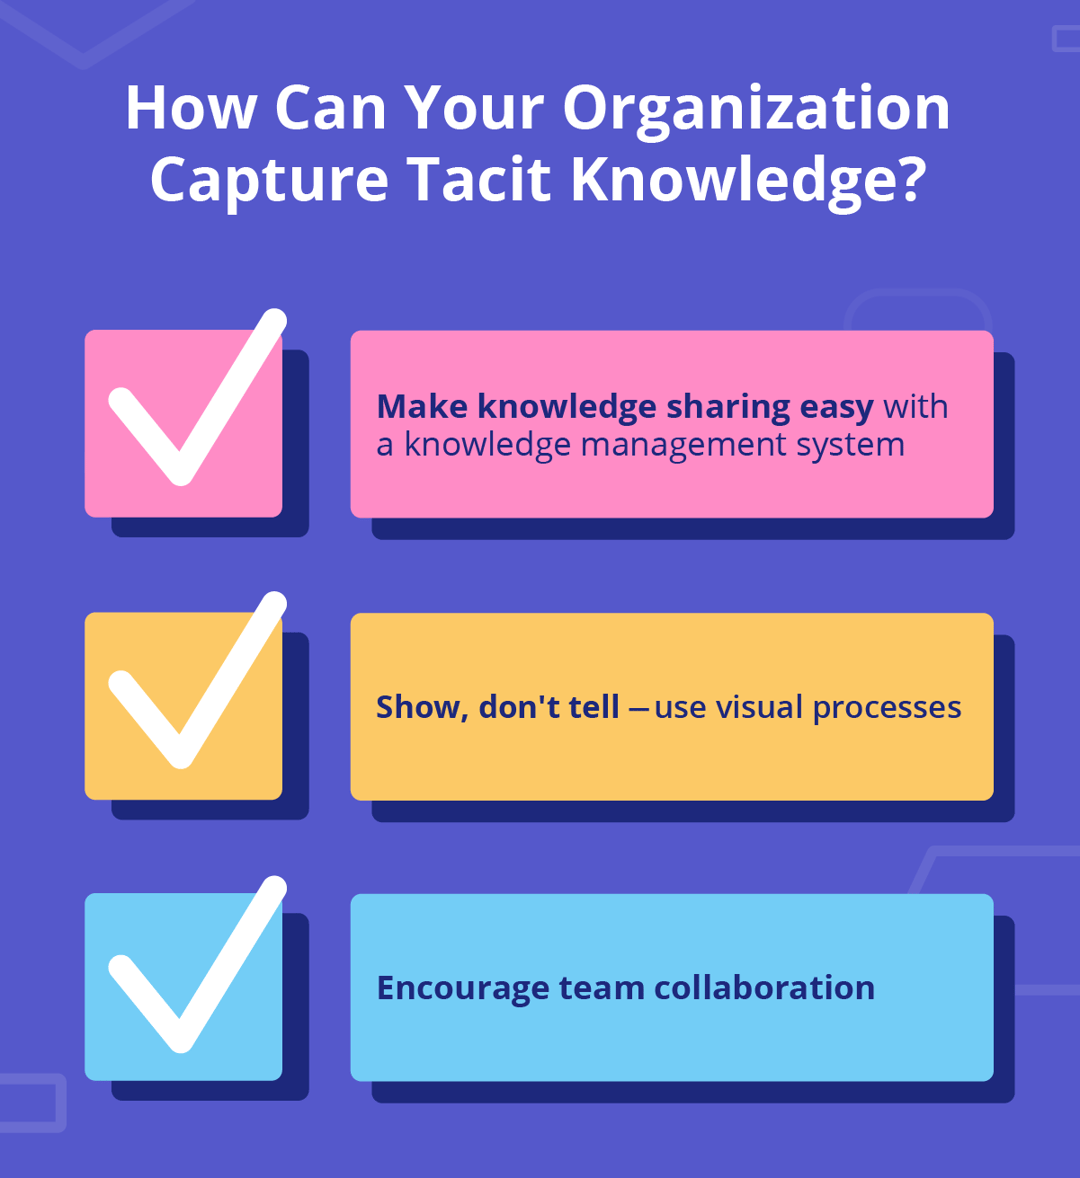 3 Ways Your Organization Can Capture Tacit Knowledge: Make knowledge sharing easy, show don't tell, encourage team collaboration